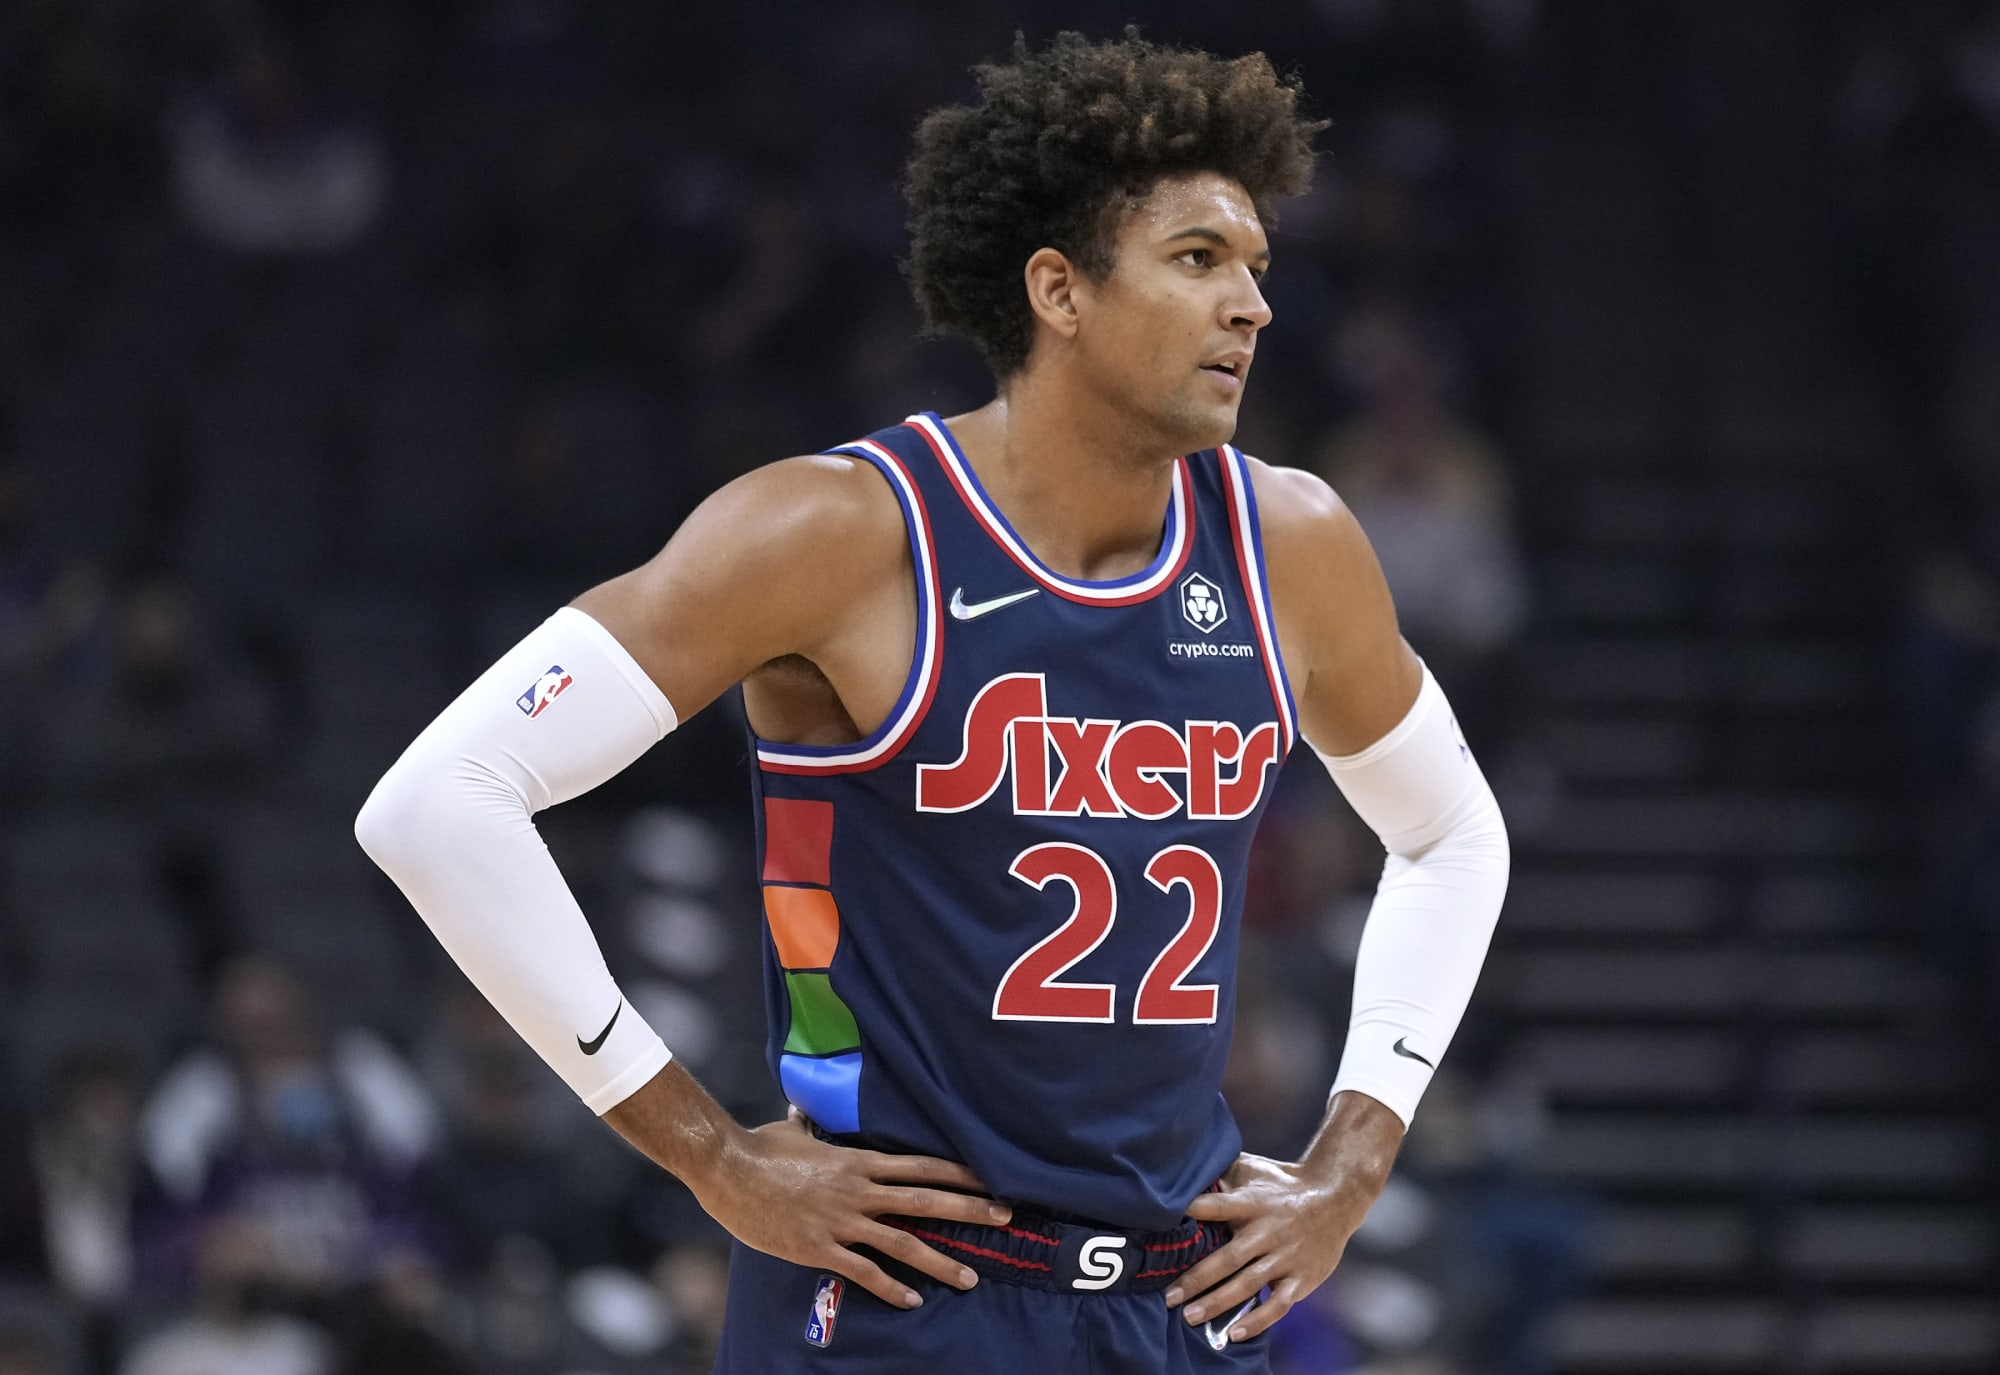 Matisse Thybulle inspired by his father to wear 'Vote' on his jersey